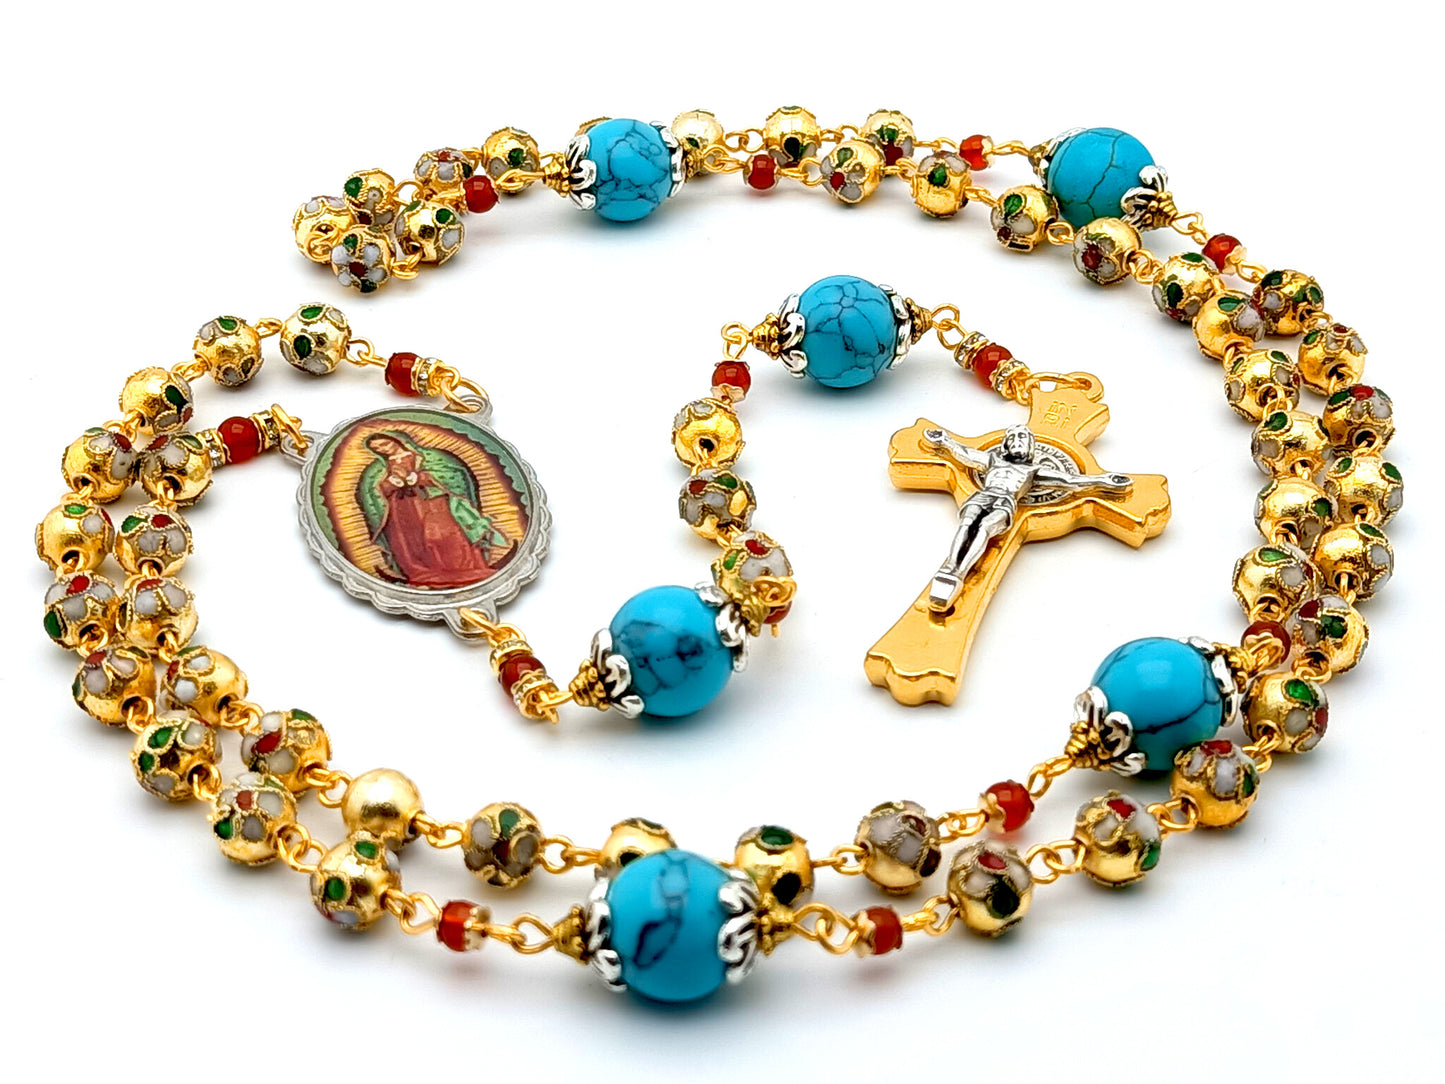 Our Lady of Guadalupe rosary beads in gold cloisonne and turquoise with golden Saint Benedict crucifix.